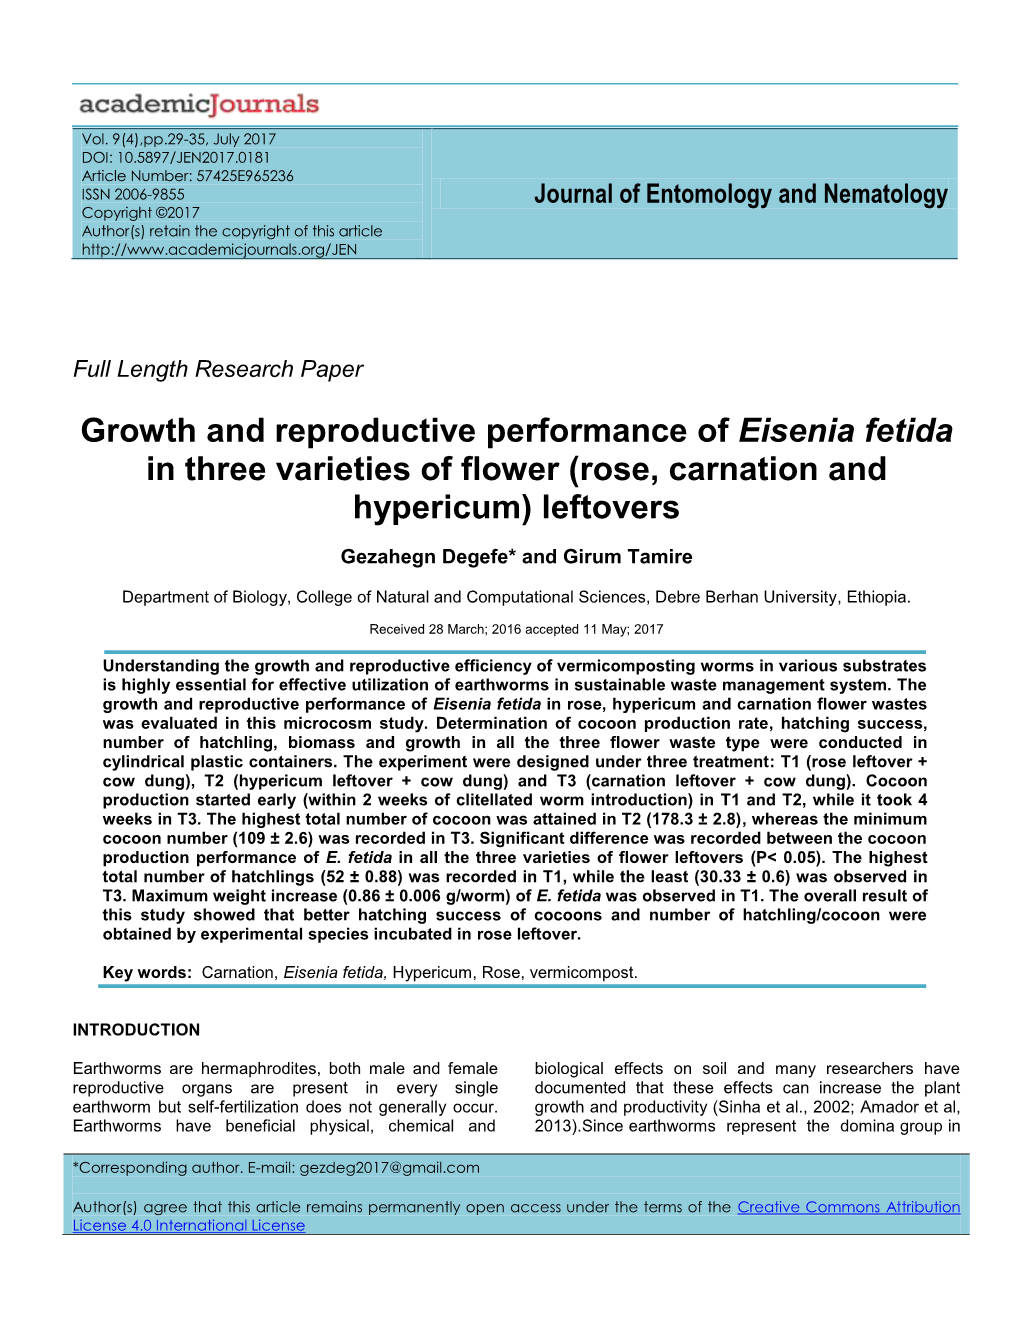 Growth and Reproductive Performance of Eisenia Fetida in Three Varieties of Flower (Rose, Carnation and Hypericum) Leftovers